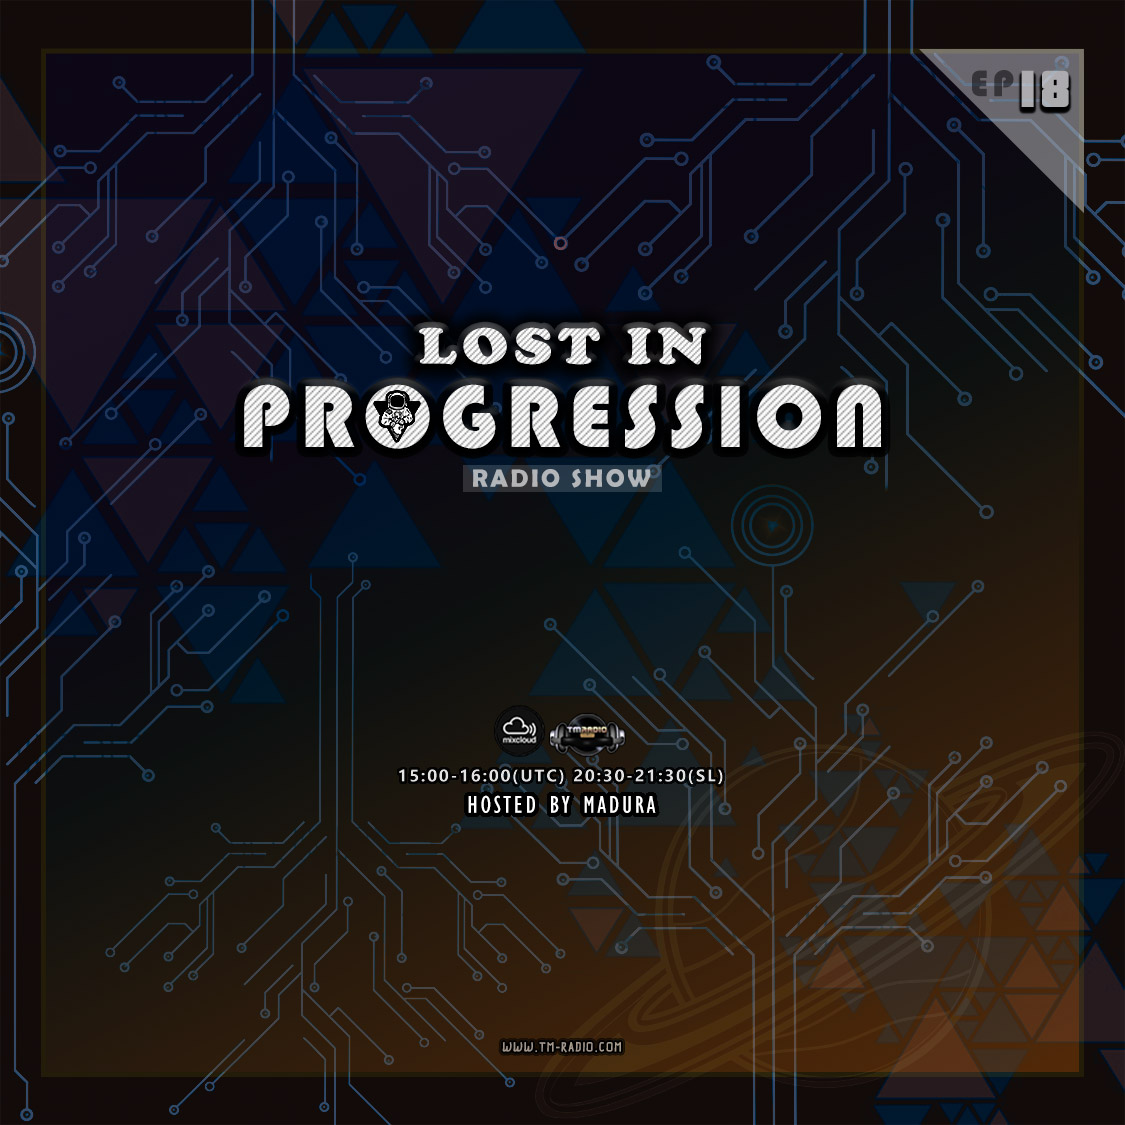 Lost in Progression :: Lost in progression Ep18 (aired on November 13th, 2020) banner logo